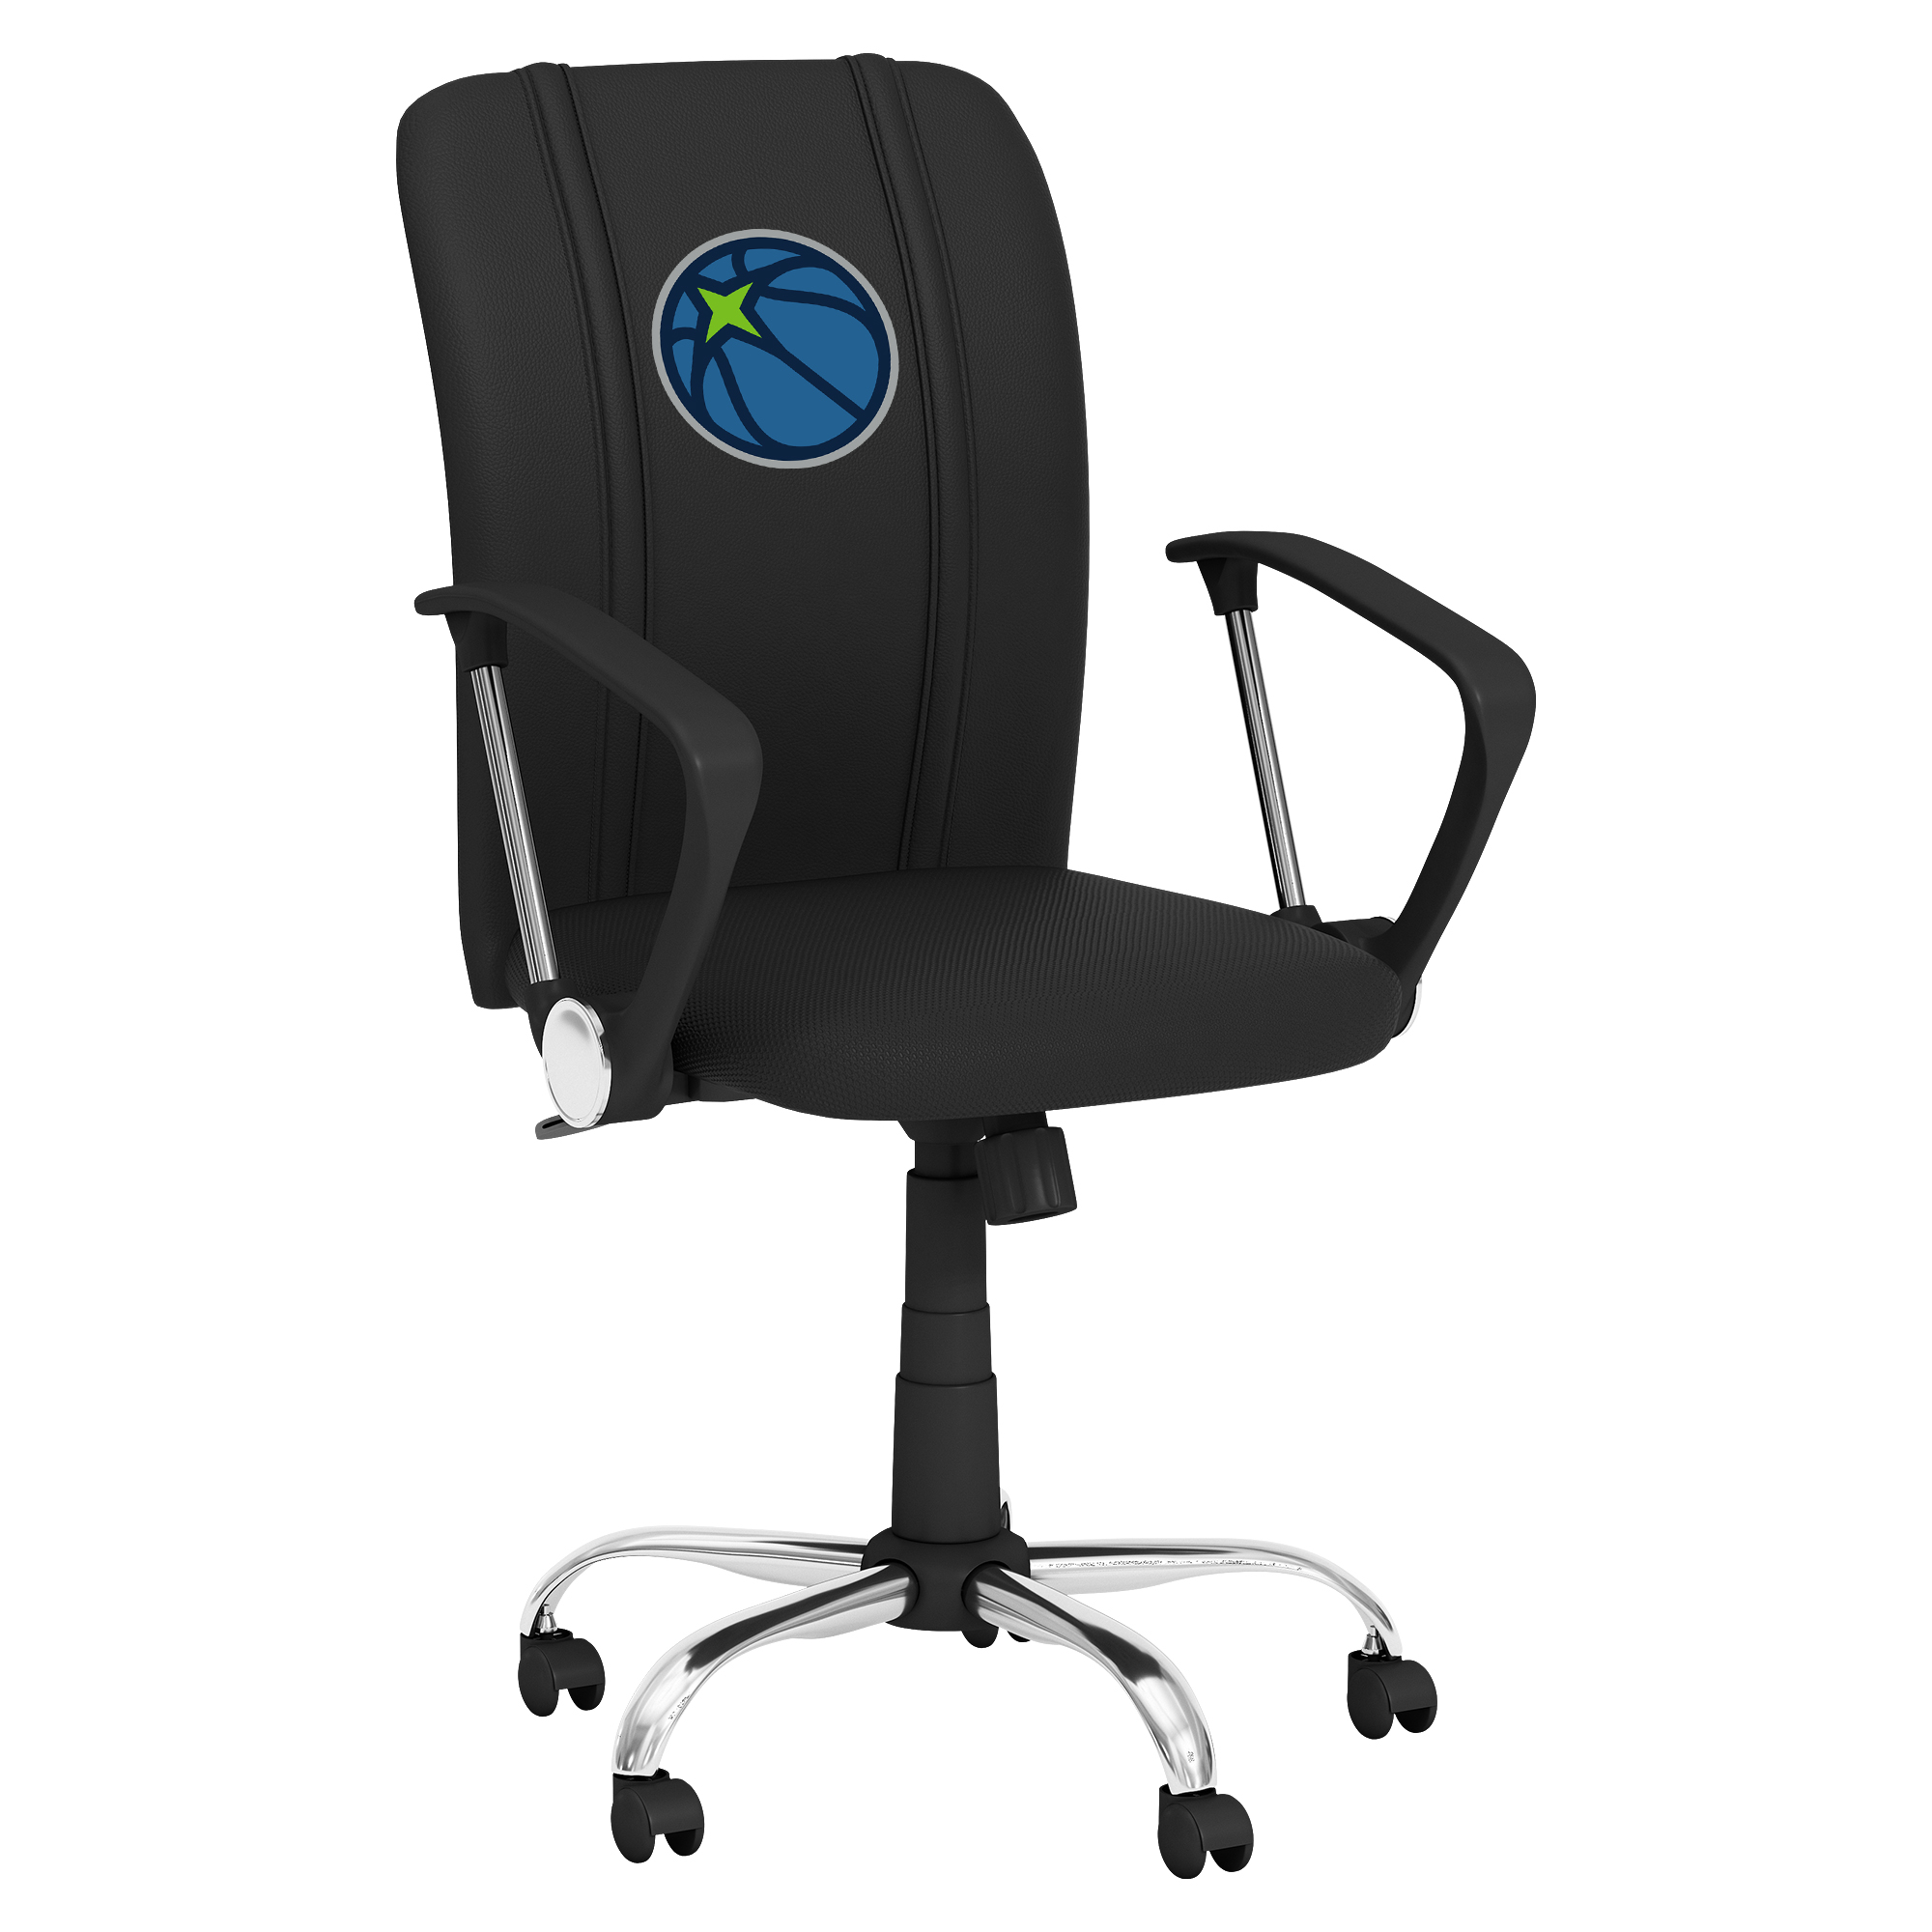 Minnesota Timberwolves Curve Task Chair with Minnesota Timberwolves Secondary Logo